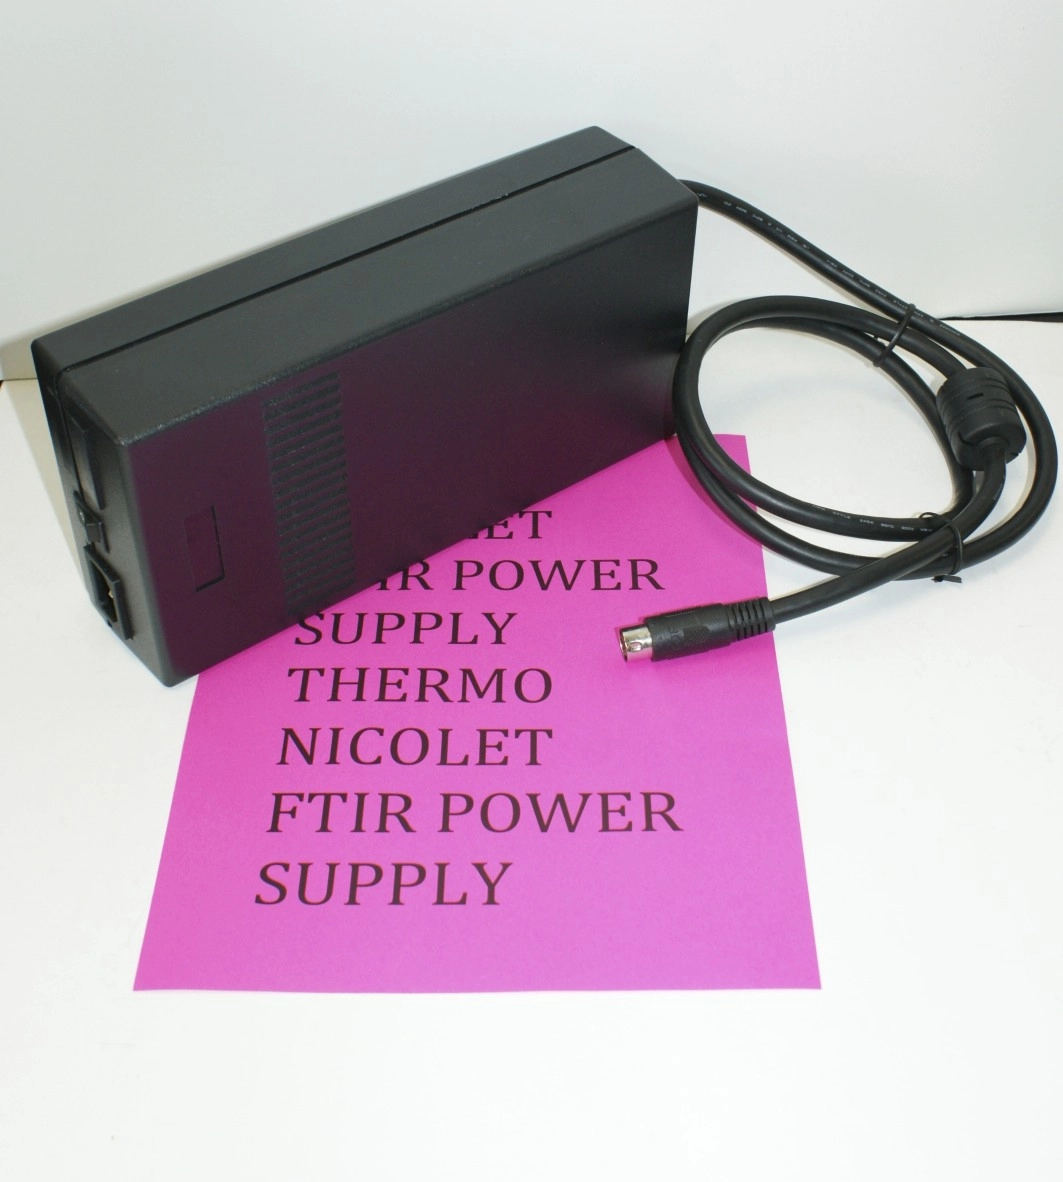 Thermo Nicolet Power Supply Thermo Nicolet 670 Power Supply Thermo Nicolet 470 Power Supply Thermo 470 Nicolet Power Supply T